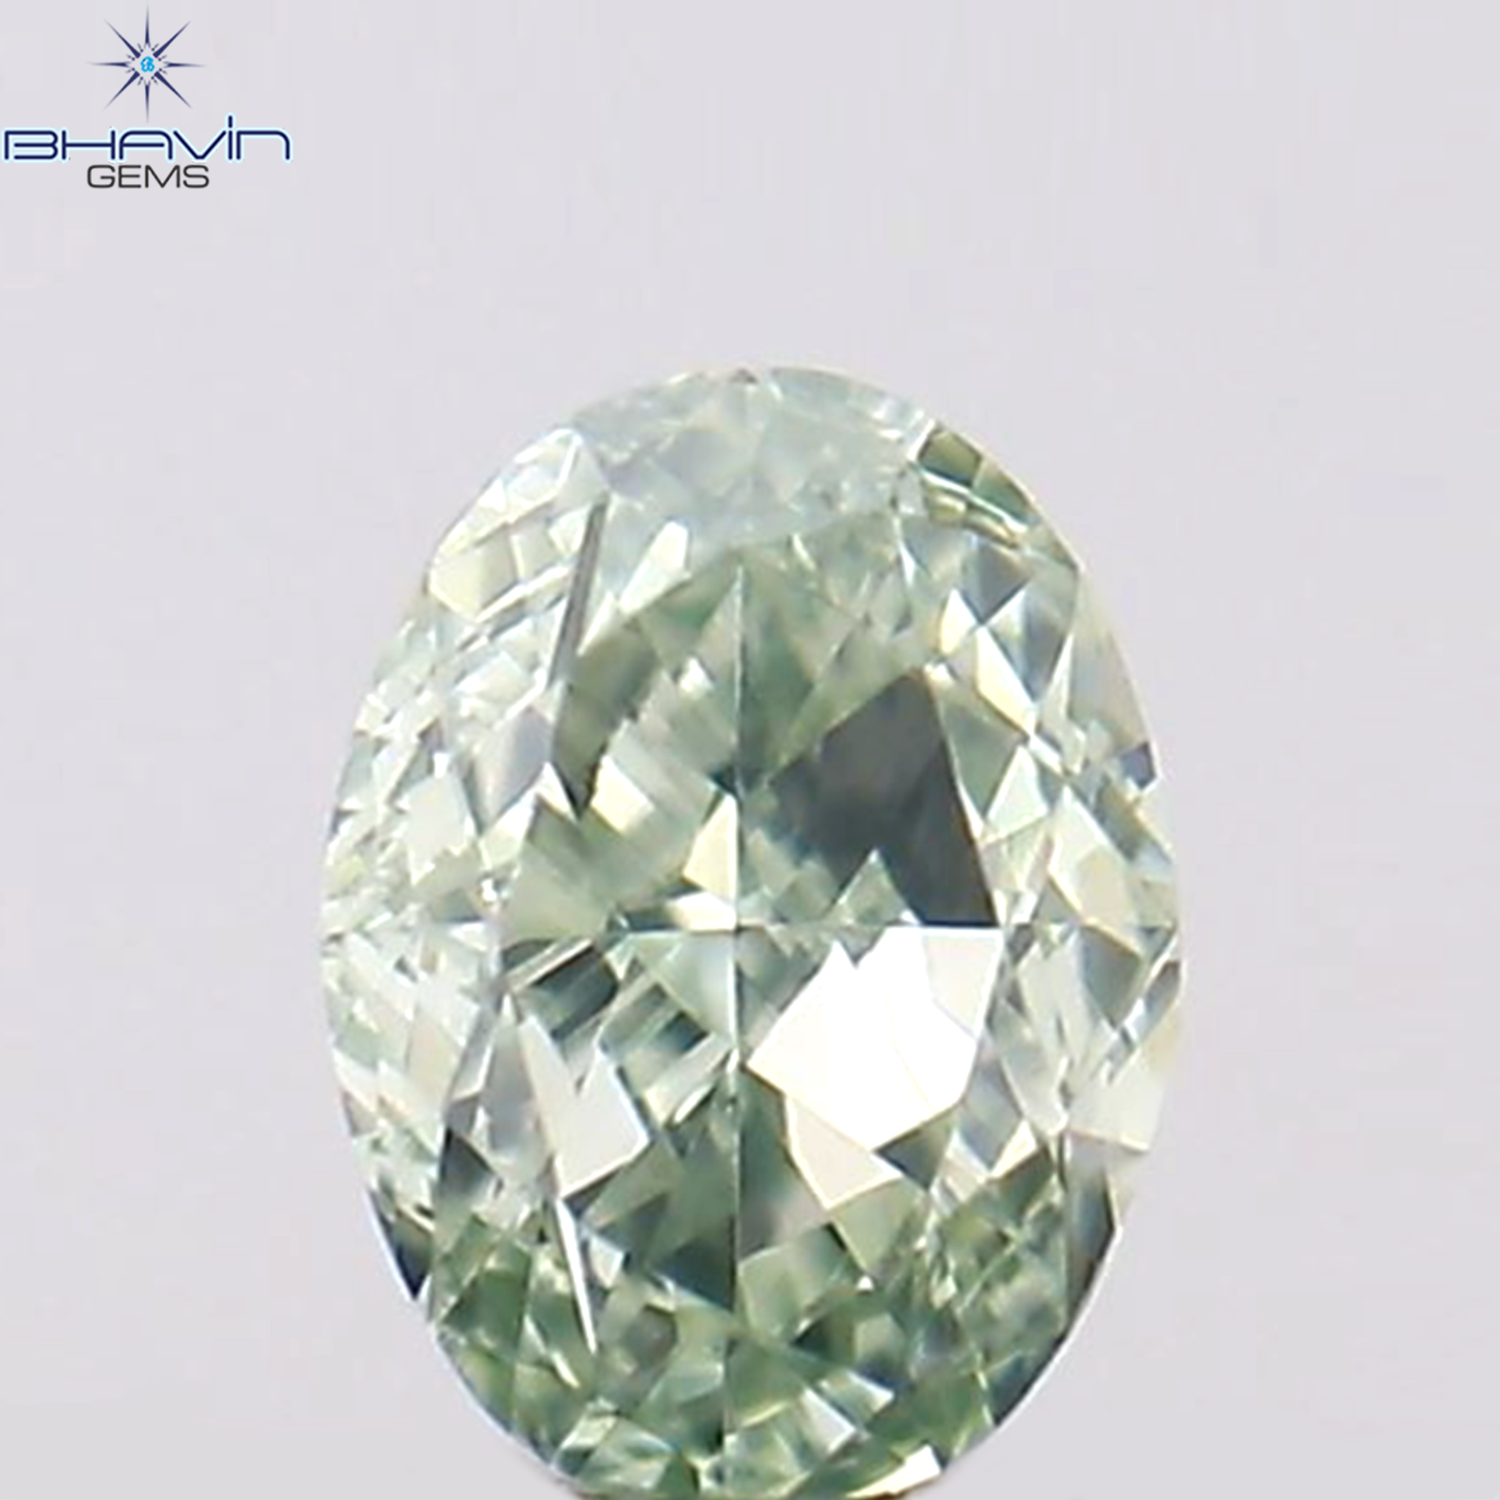 0.08 CT Oval Shape Natural Diamond Green Color VS2 Clarity (2.83 MM)